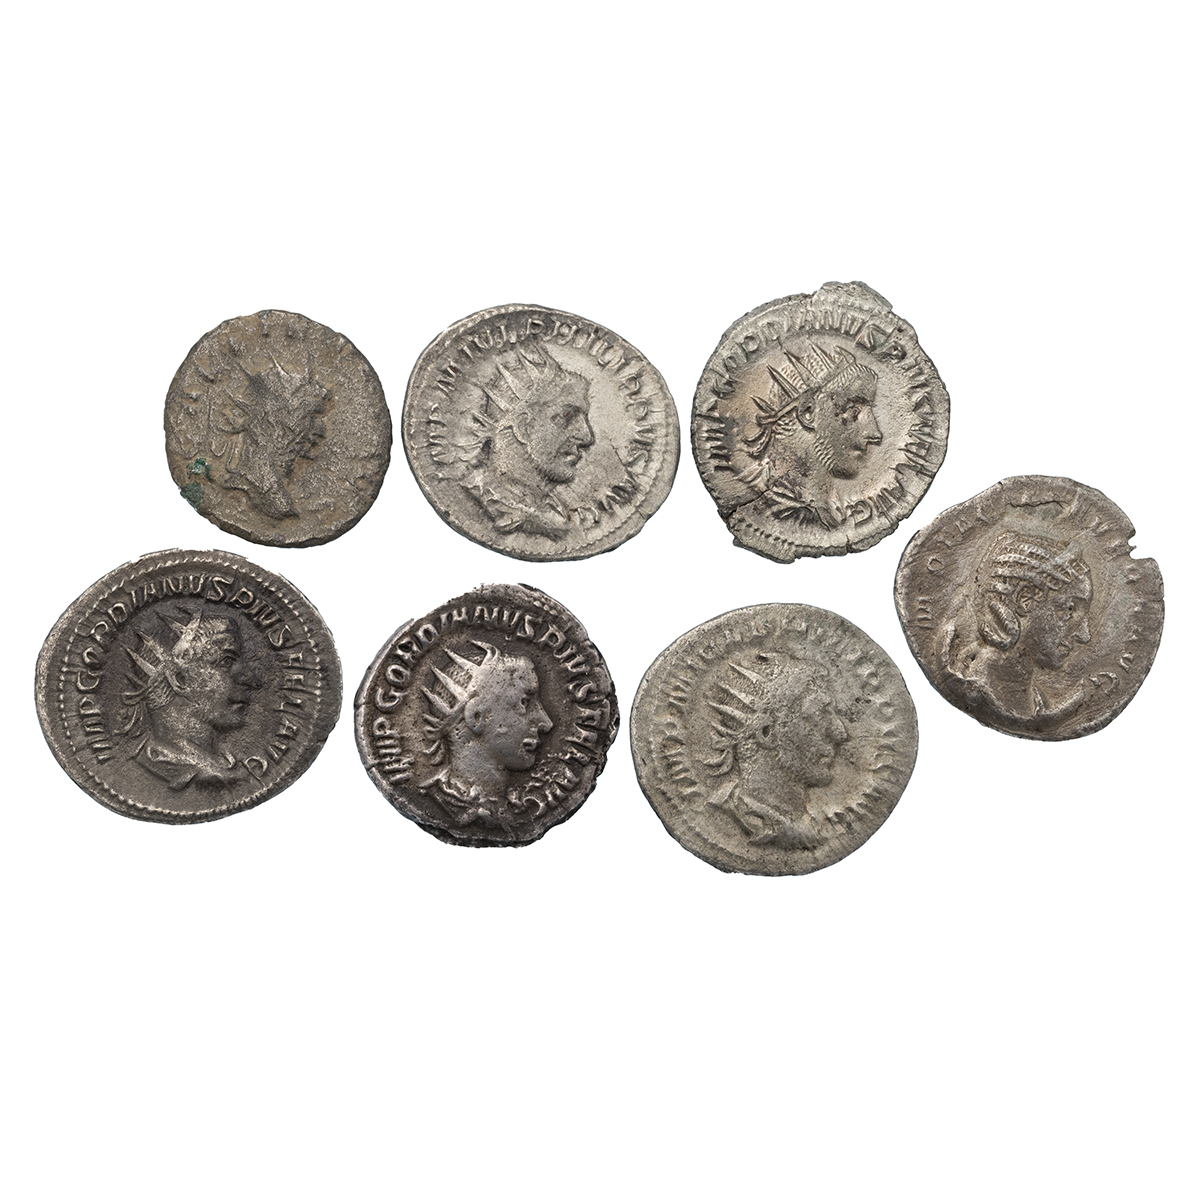 Seven (7) 3rd century Roman silver AR Antoniniani, various Emperors, mints and grades. Weight: 26...